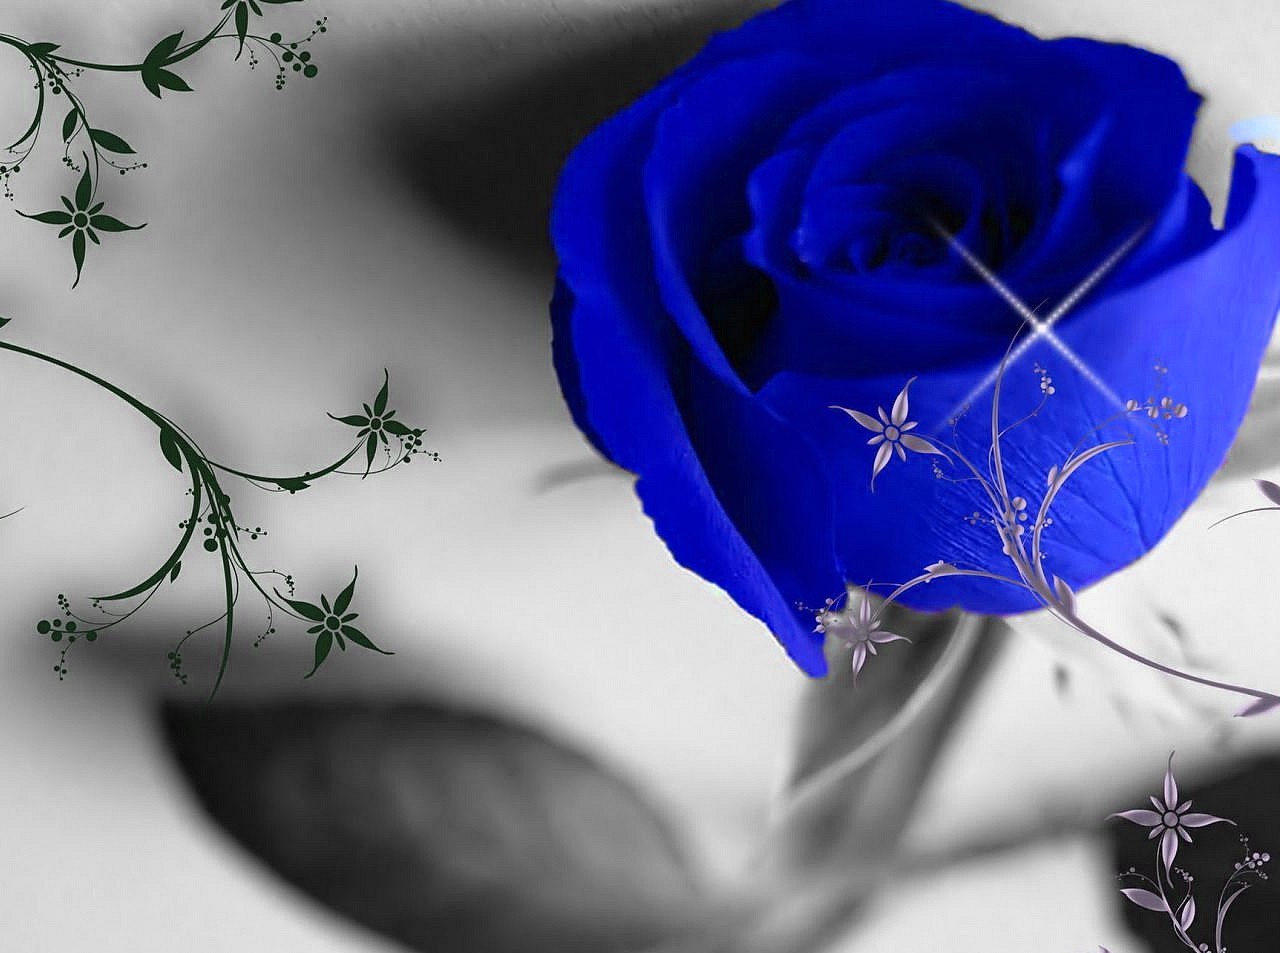 3D Wallpaper Hd Blue Rose - 3d Painting Wallpapers Group 64 / If you're